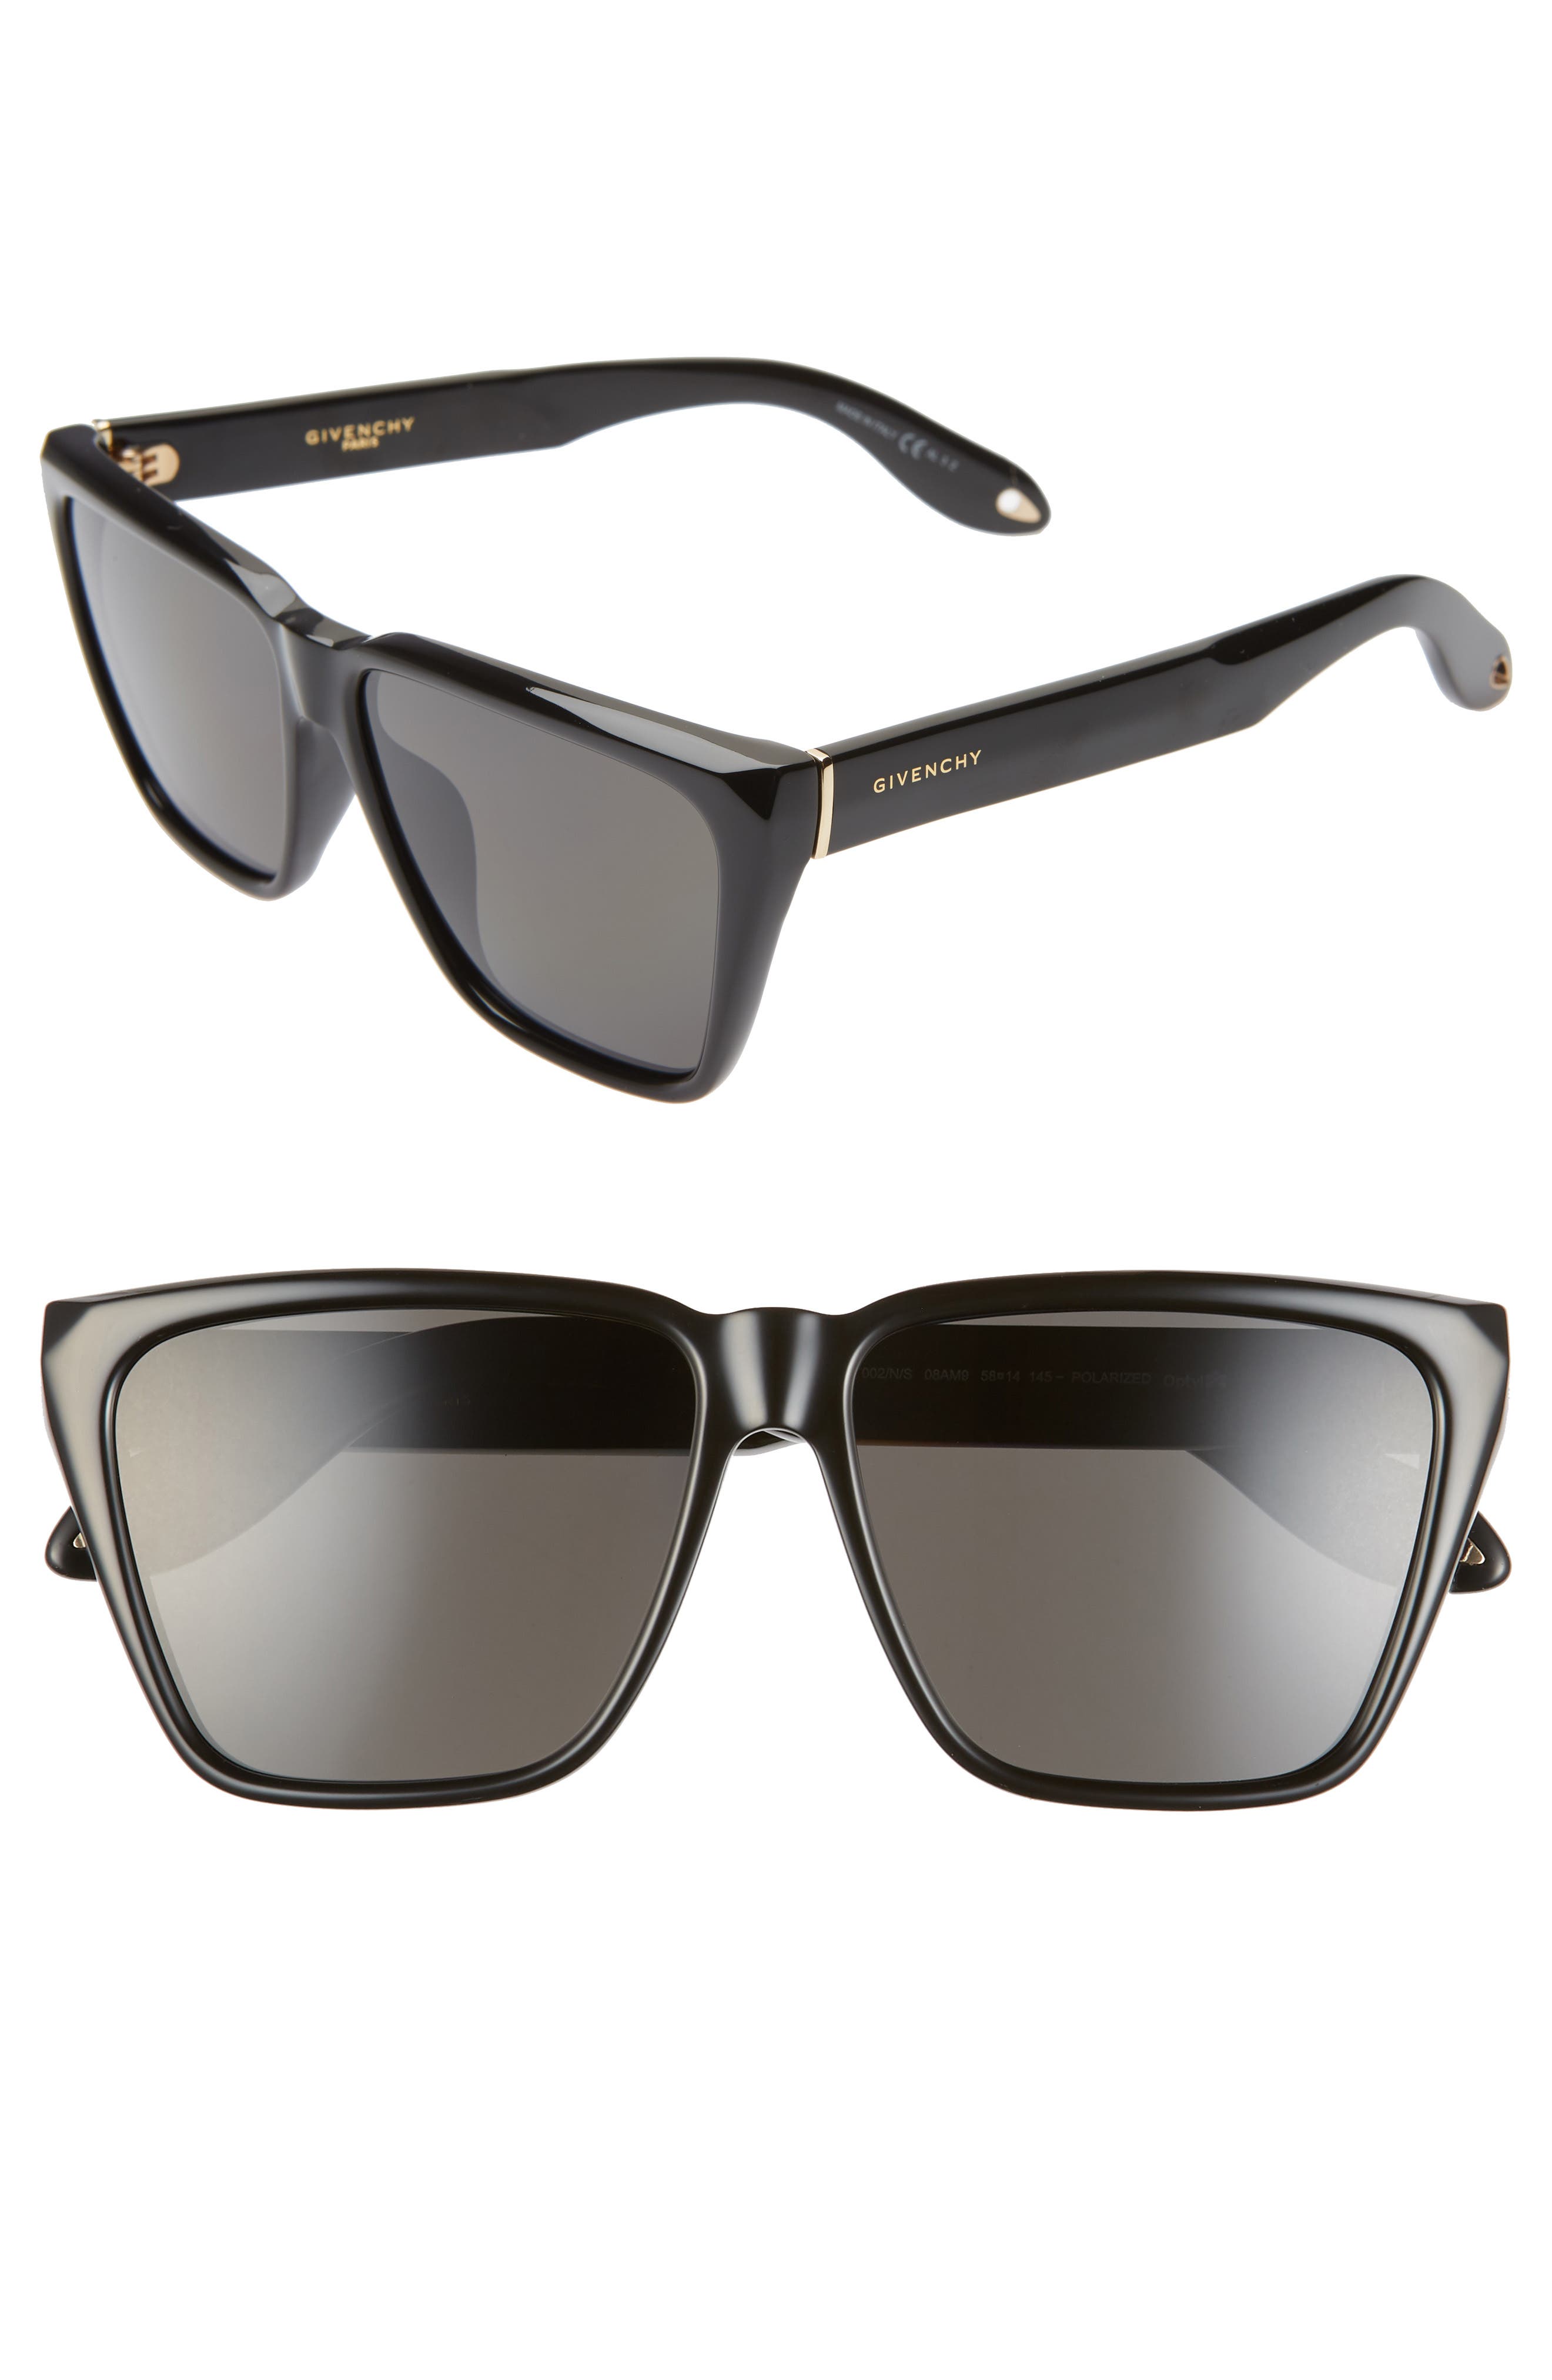 givenchy 58mm flat top sunglasses